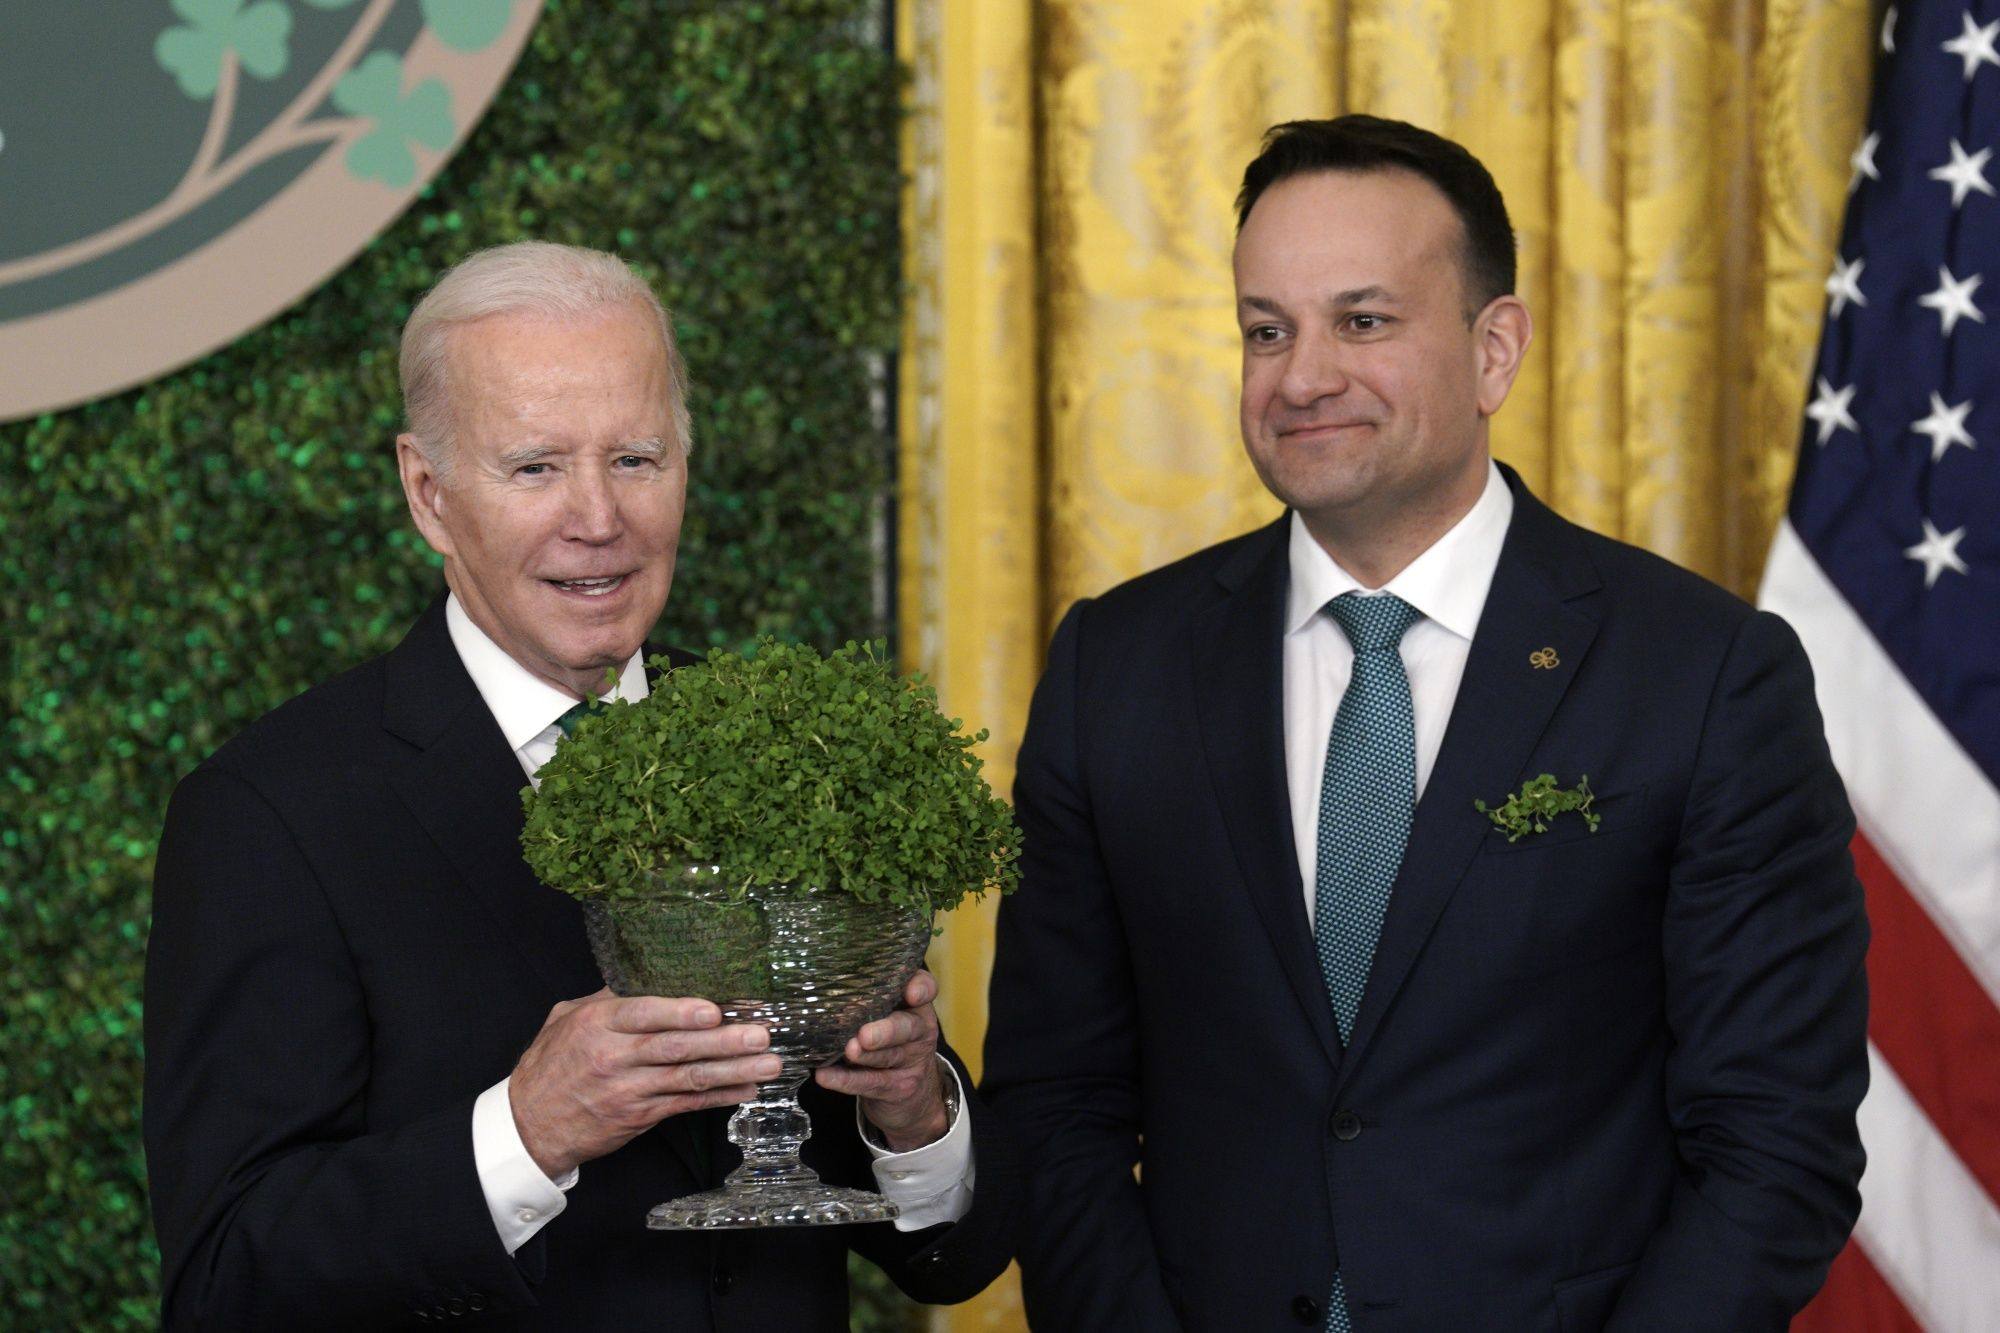 US President Joe Biden received a traditional bowl of Shamrock on St. Patrick’s Day. Photo: Bloomberg